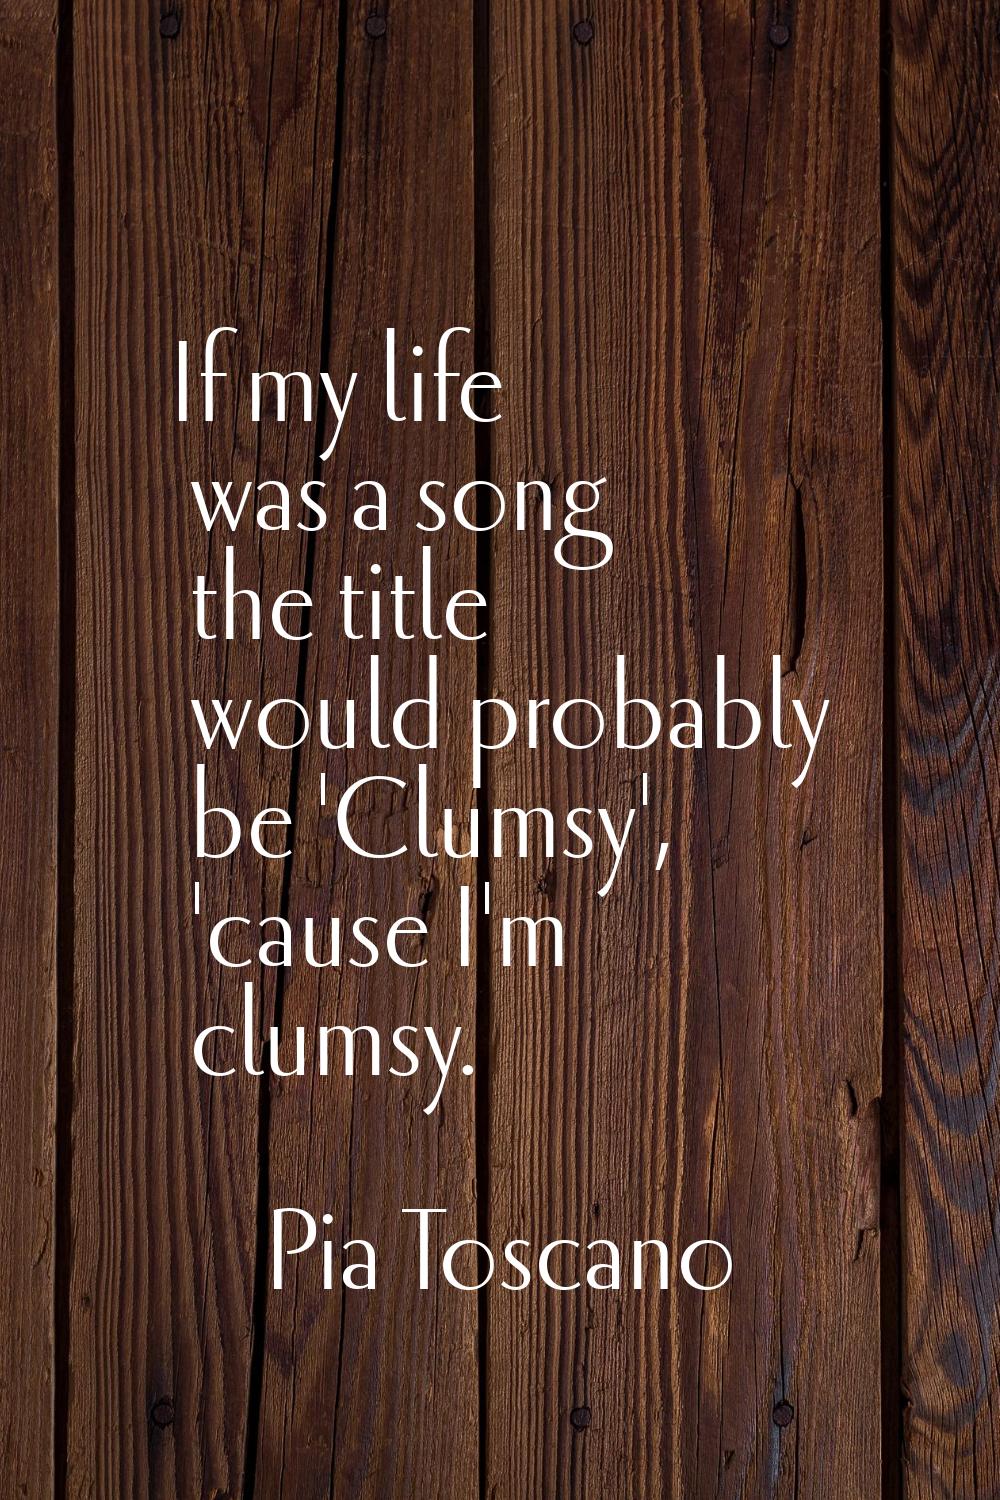 If my life was a song the title would probably be 'Clumsy', 'cause I'm clumsy.